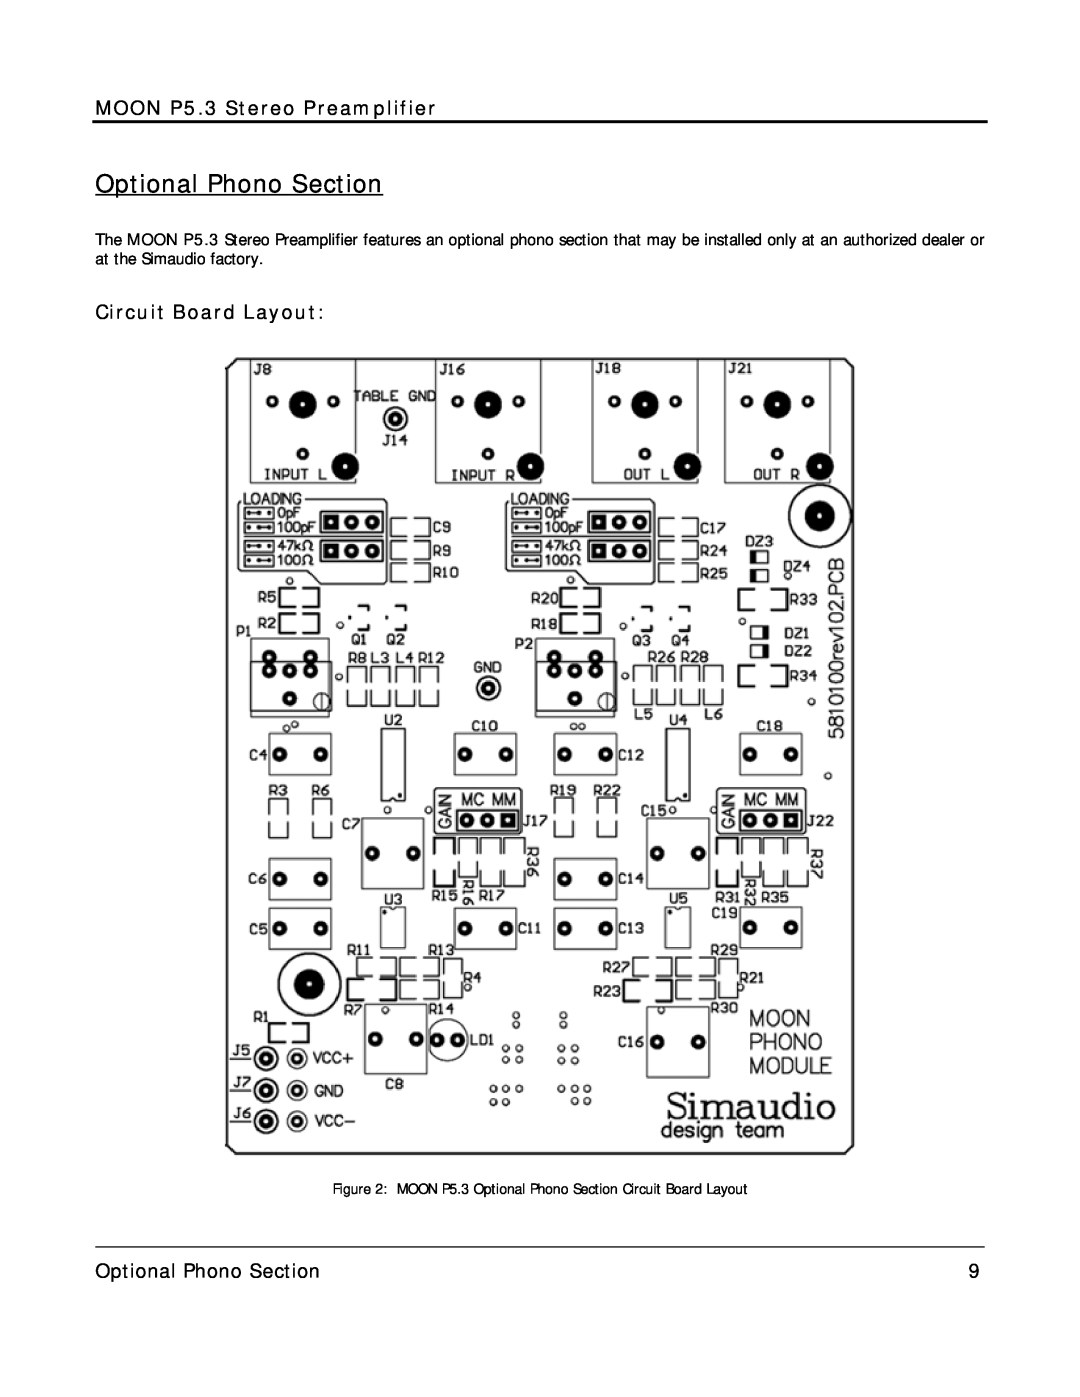 Simaudio P 5.3 owner manual Optional Phono Section, MOON P5.3 Stereo Preamplifier, Circuit Board Layout 